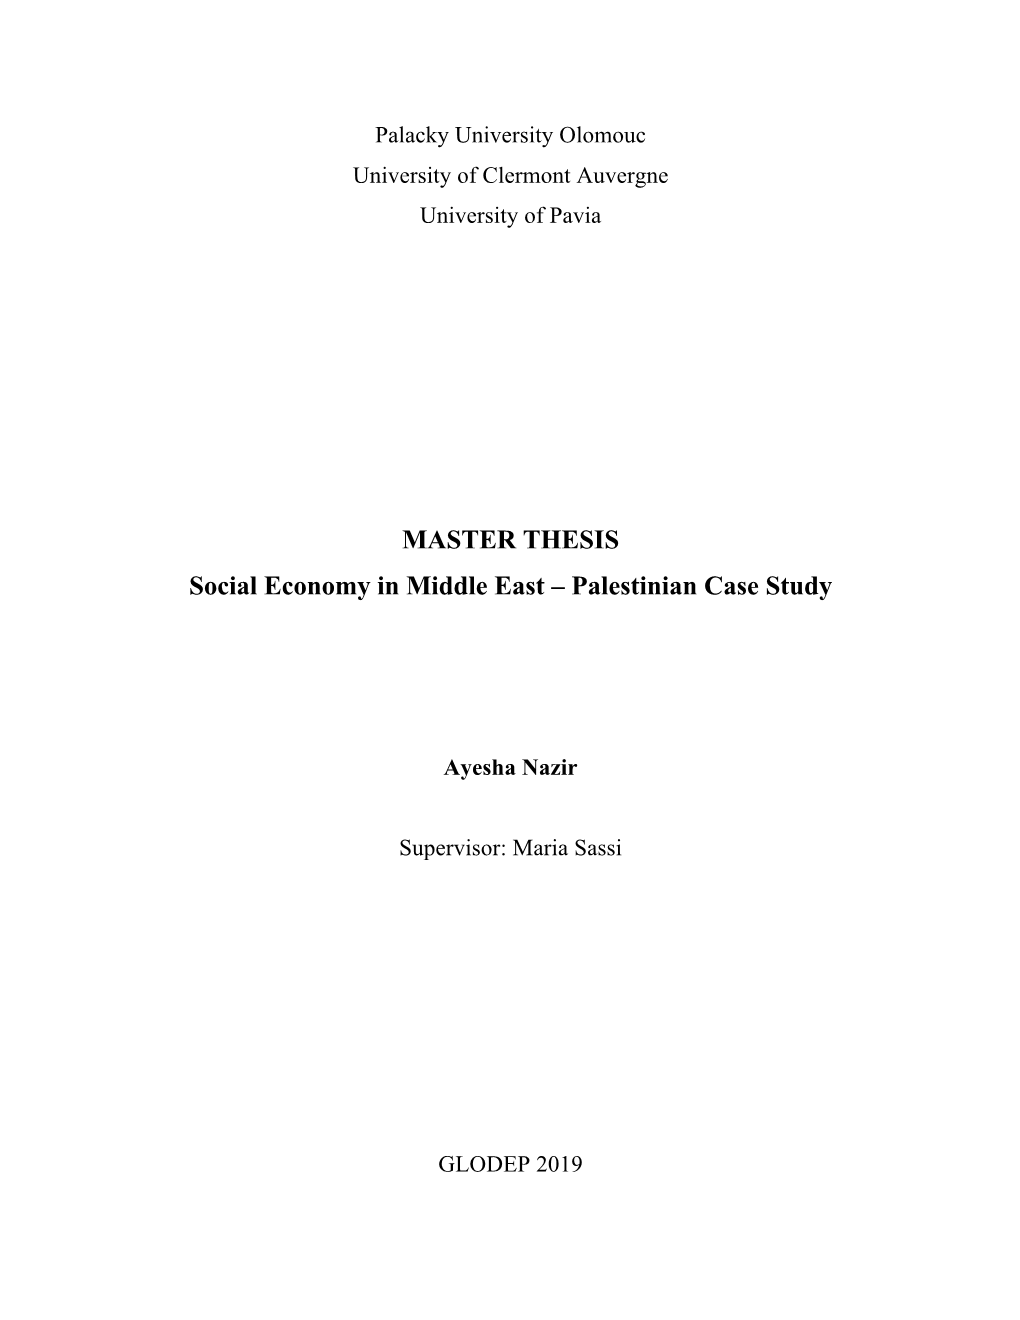 MASTER THESIS Social Economy in Middle East – Palestinian Case Study